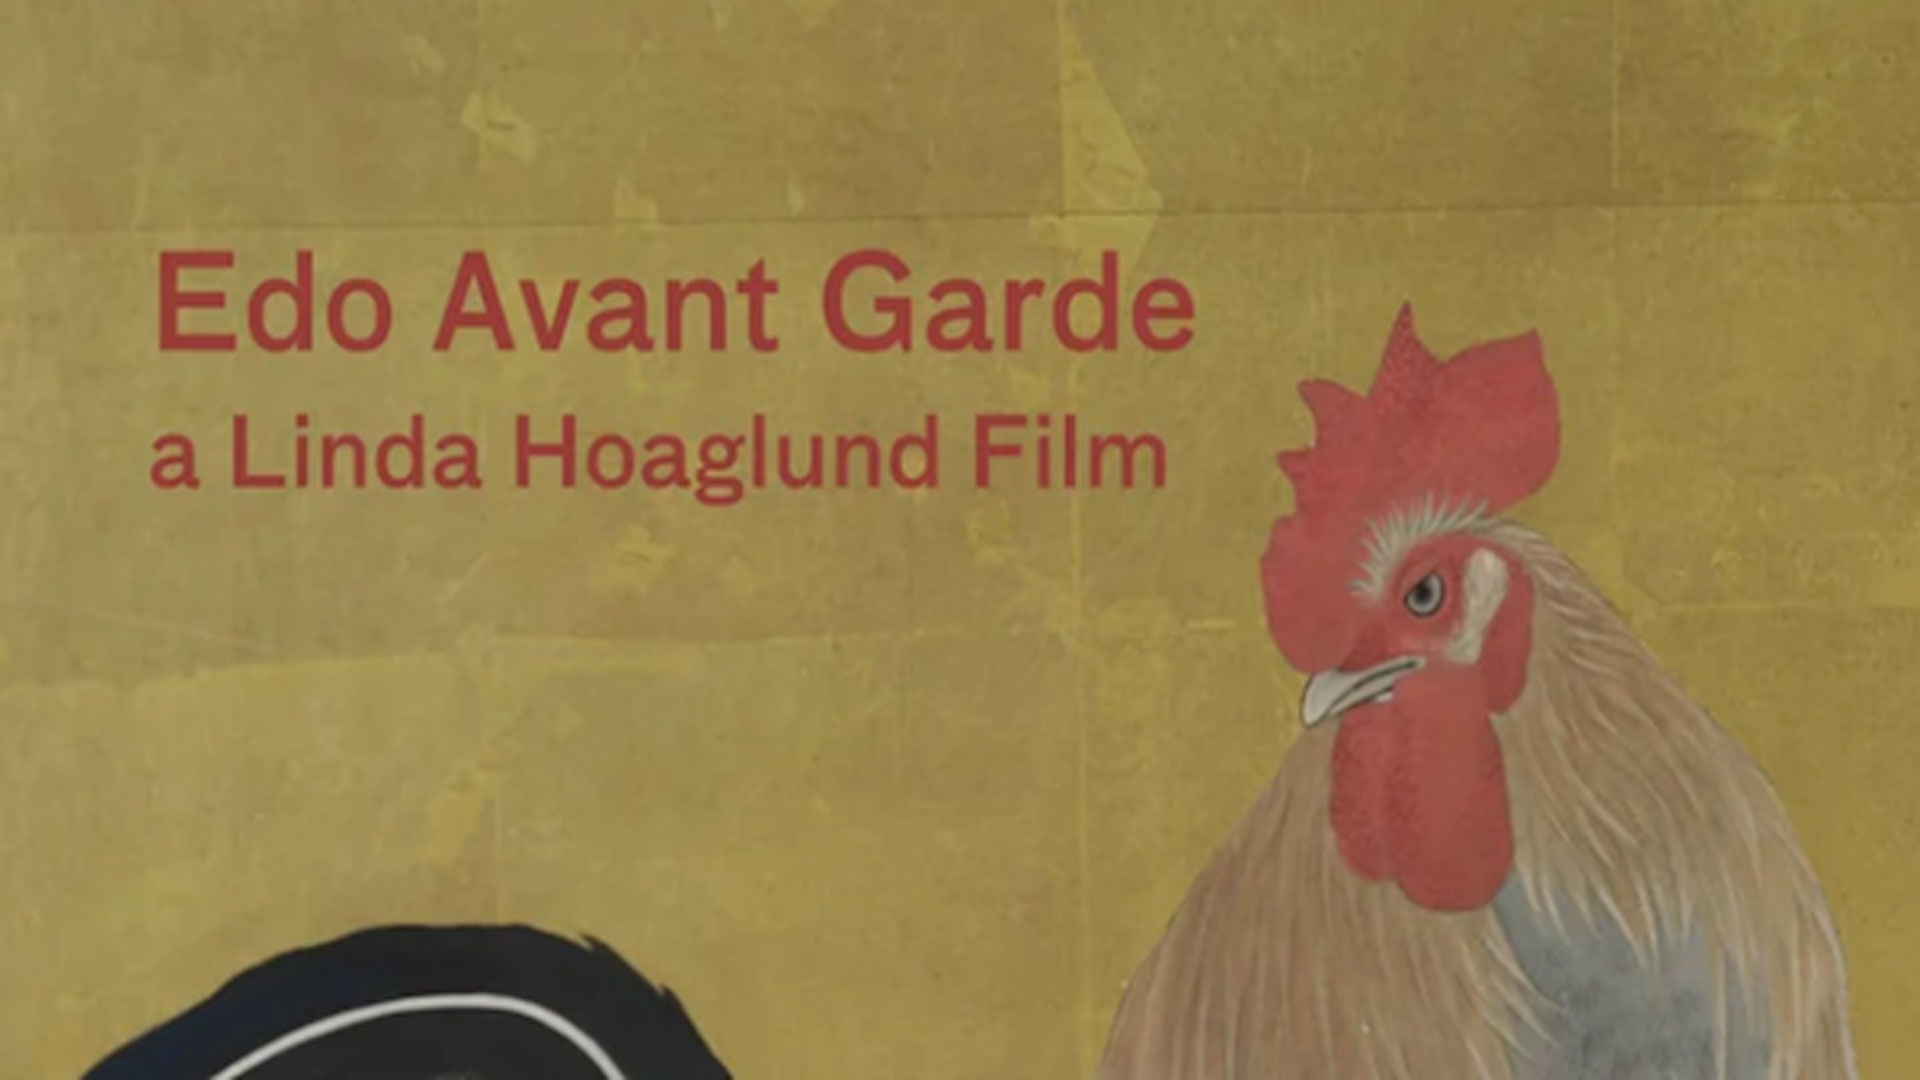 a still from the film Edo Avant Garde showing a rooster and the name of the film and filmermaker